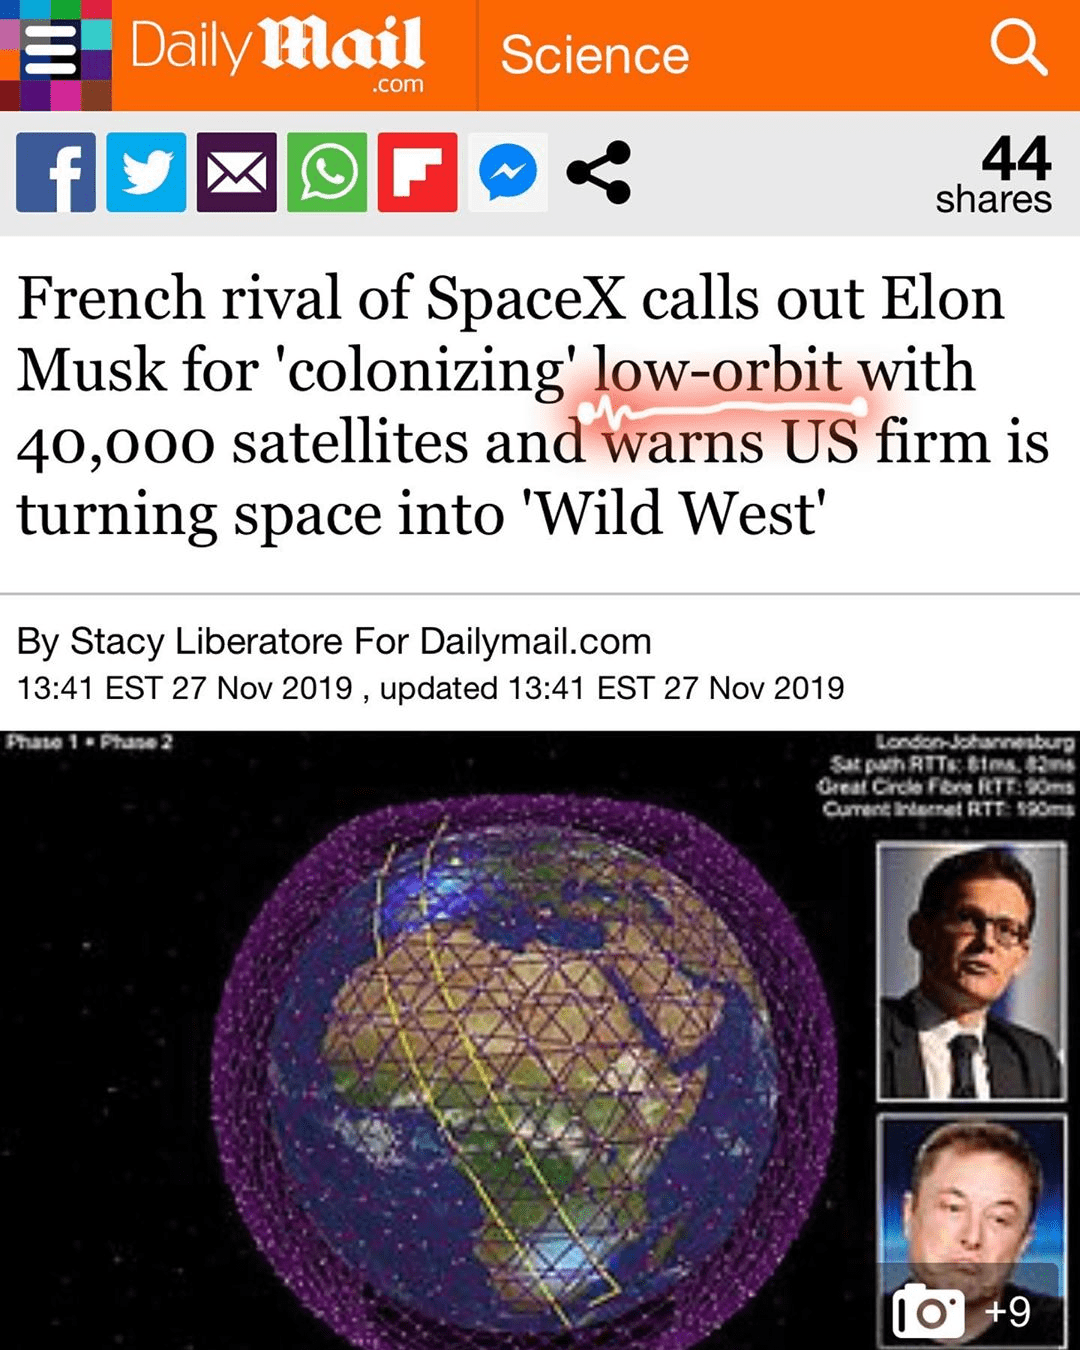 You are currently viewing French Rival of SpaceX Calls Out Elon Musk for “Colonizing” Low-Orbit with 40,000 Satellites and Warns U.S. Firm is Turning Space into “Wild West”